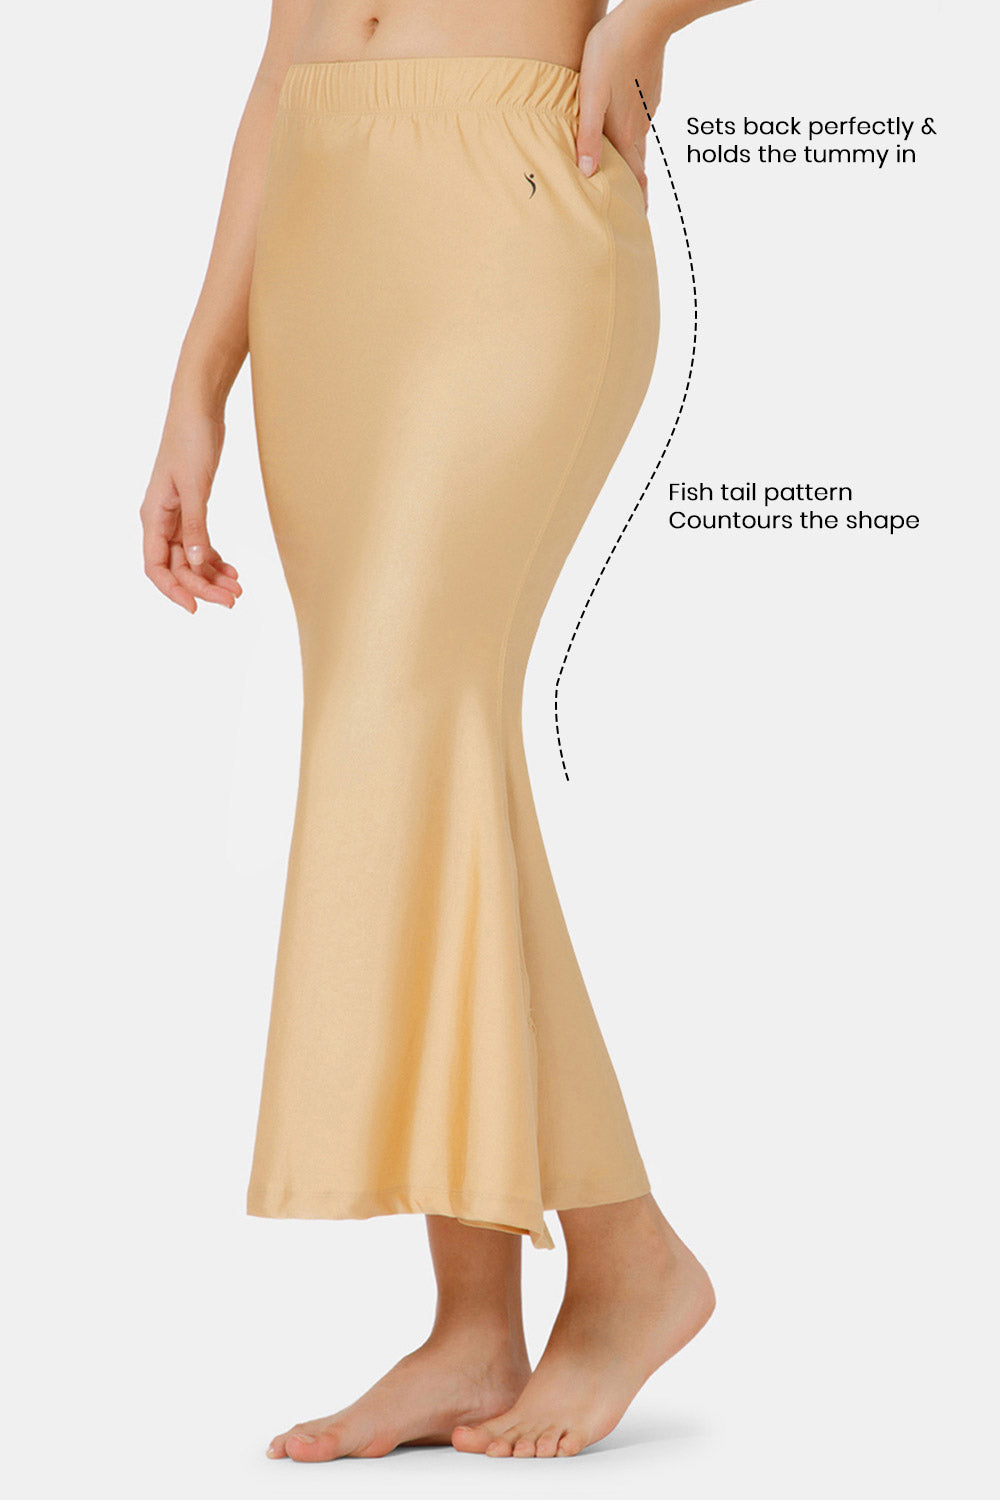 Intimacy Seamless Sweat Absorbent Mermaid Saree Shimmer Shapewear - Gold - SW03